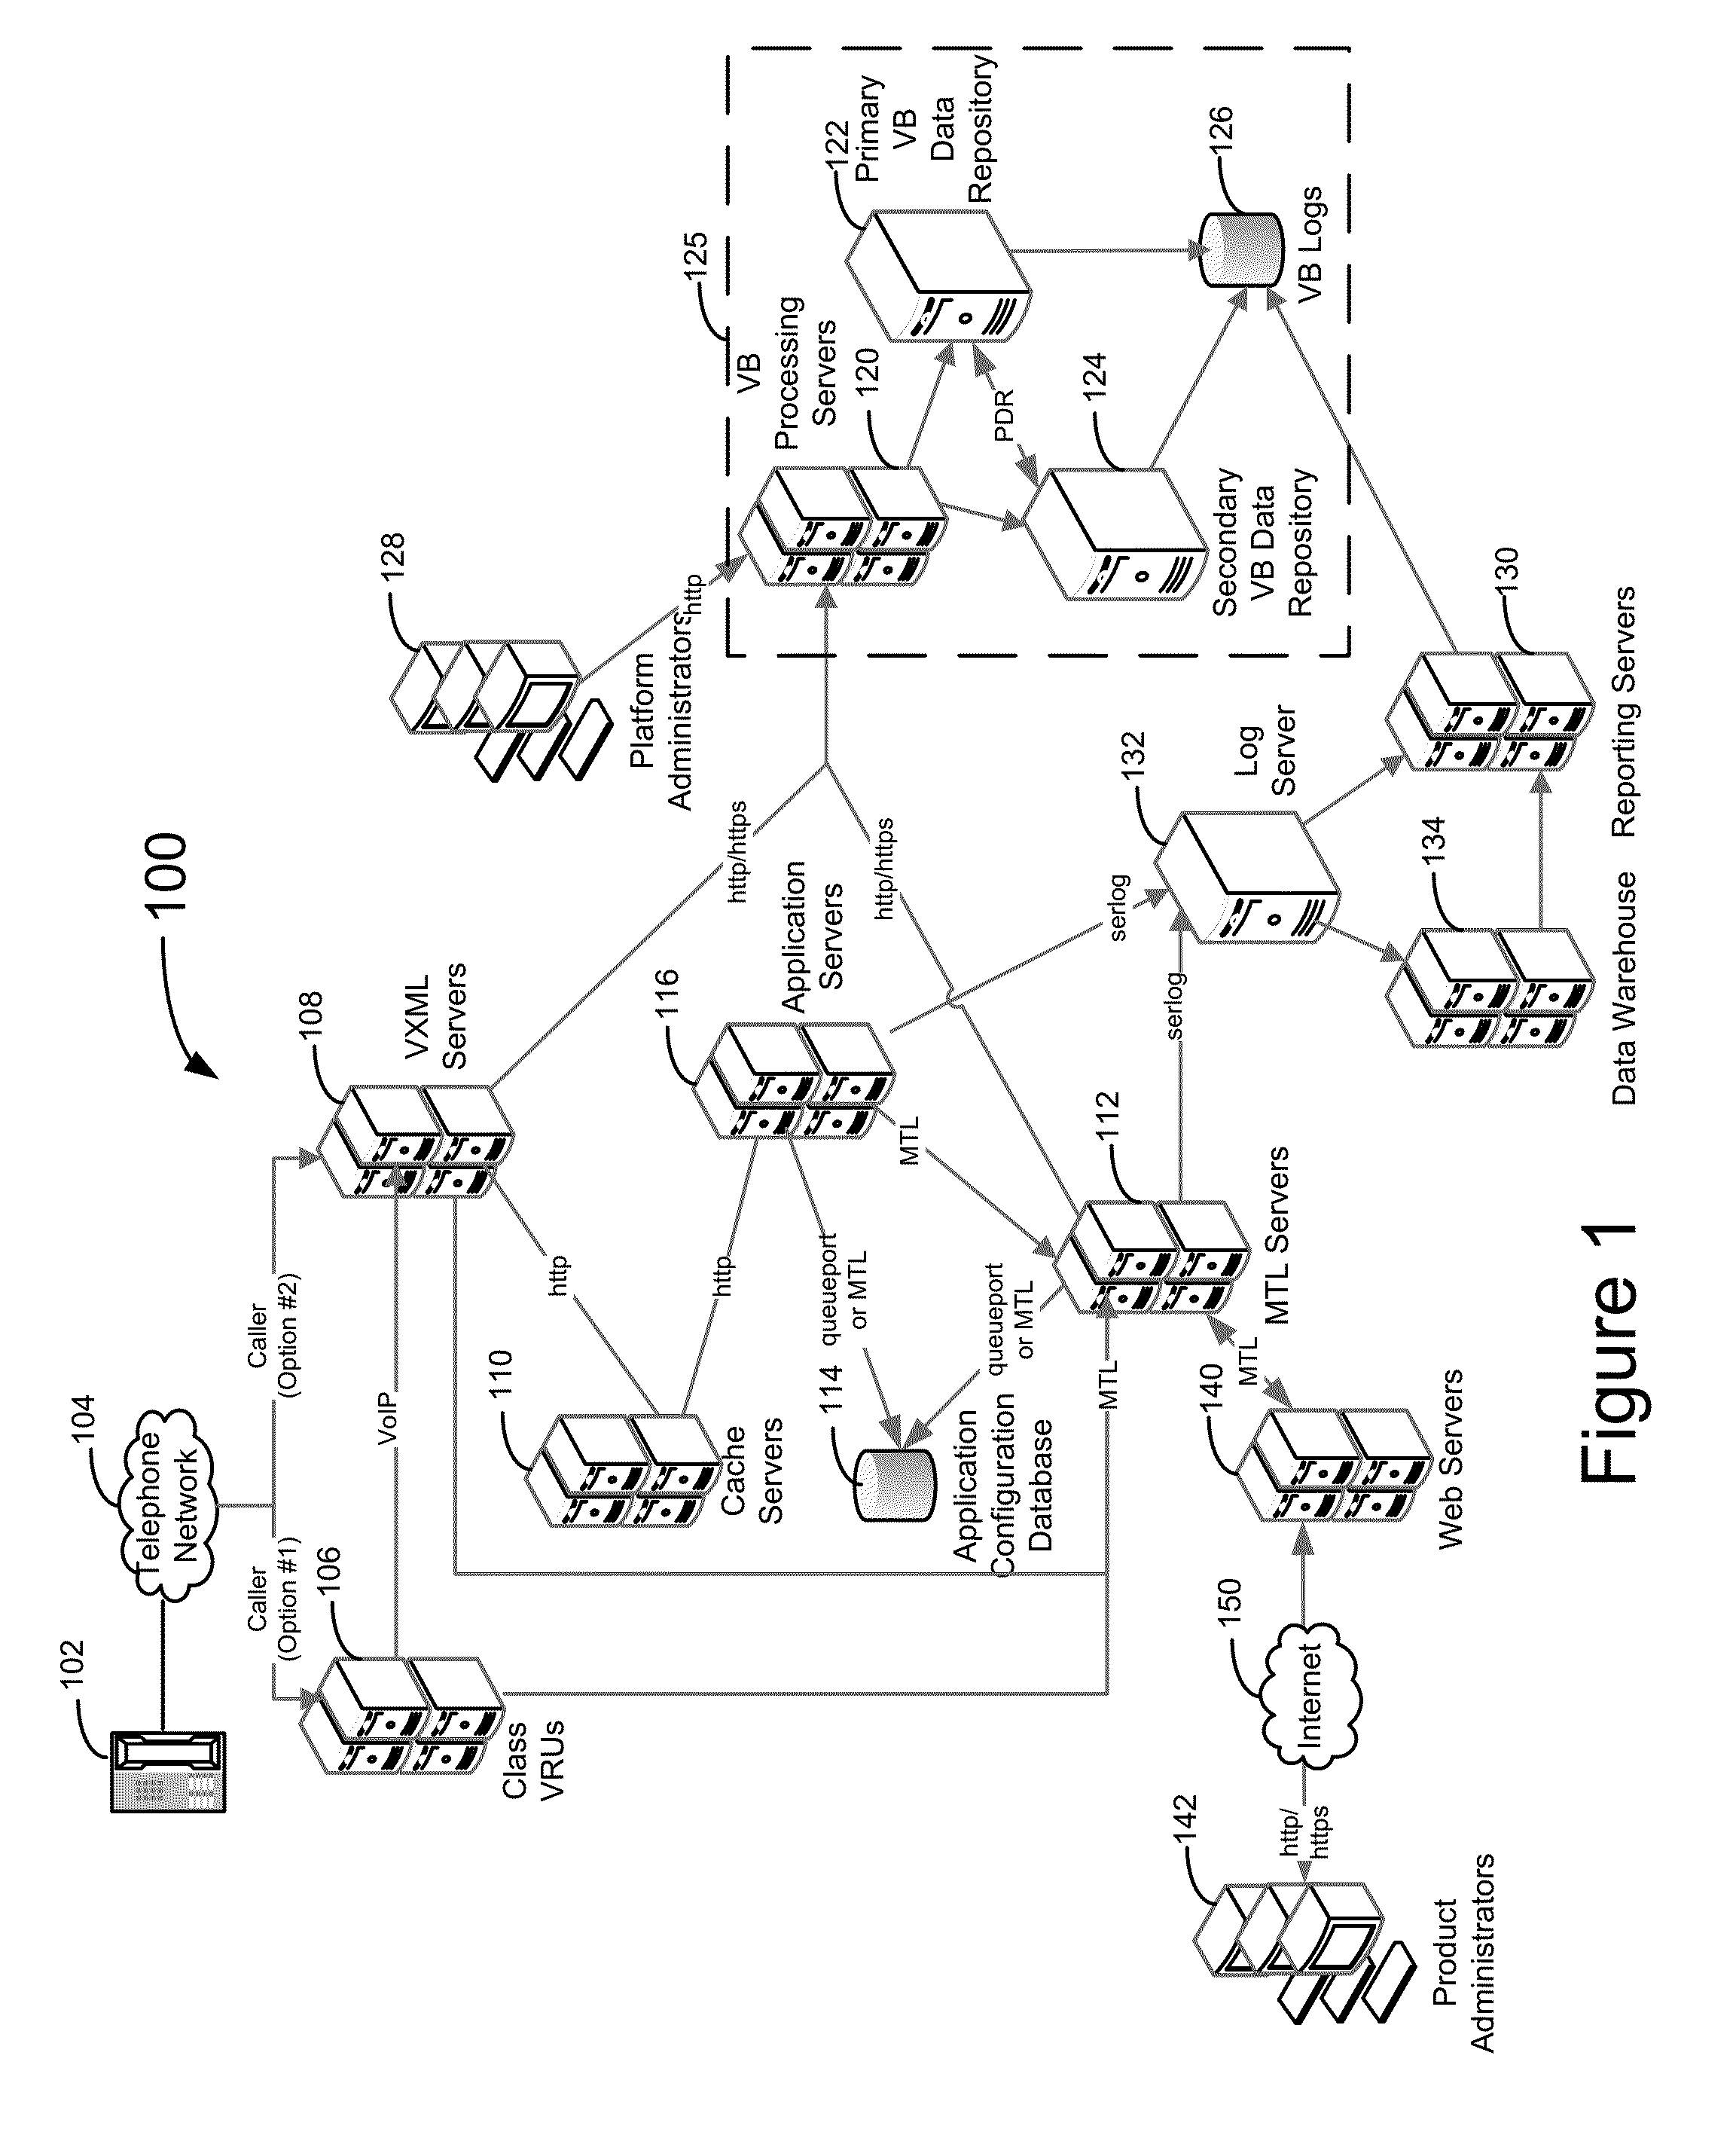 System, method, and computer-readable medium that facilitate voice biometrics user authentication